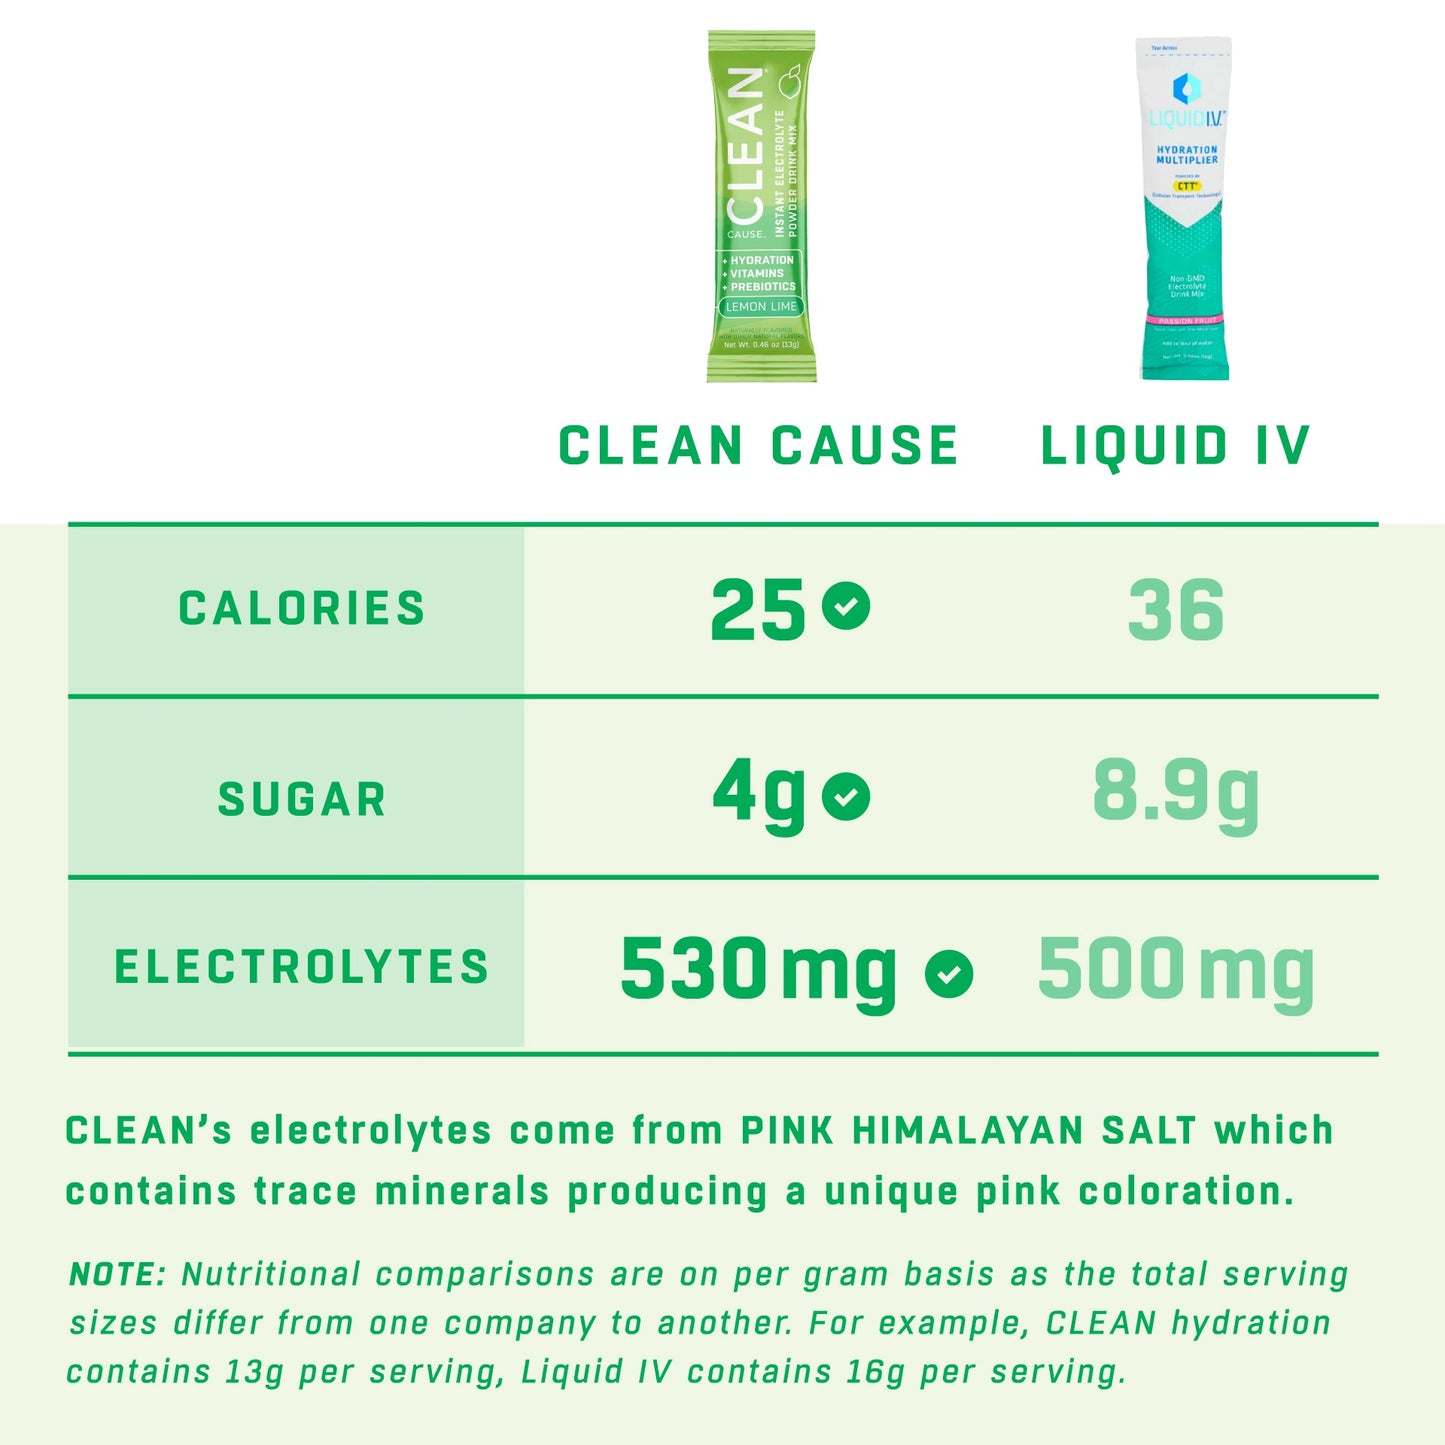 A chart comparing CLEAN Cause electrolyte hydration packets to packets of Liquid IV. CLEAN Cause: Calories 25, Sugar 4g, Electrolytes 530mg. Liquid IV: Calories 36, Sugar 8.9g, Electrolytes 500mg. Below the chart: NOTE: Nutritional comparisons are on per gram basis as the total serving sizes differ from one company to another. For example, CLEAN hydration contains 13g per serving. Liquid IV contains 16g per serving.